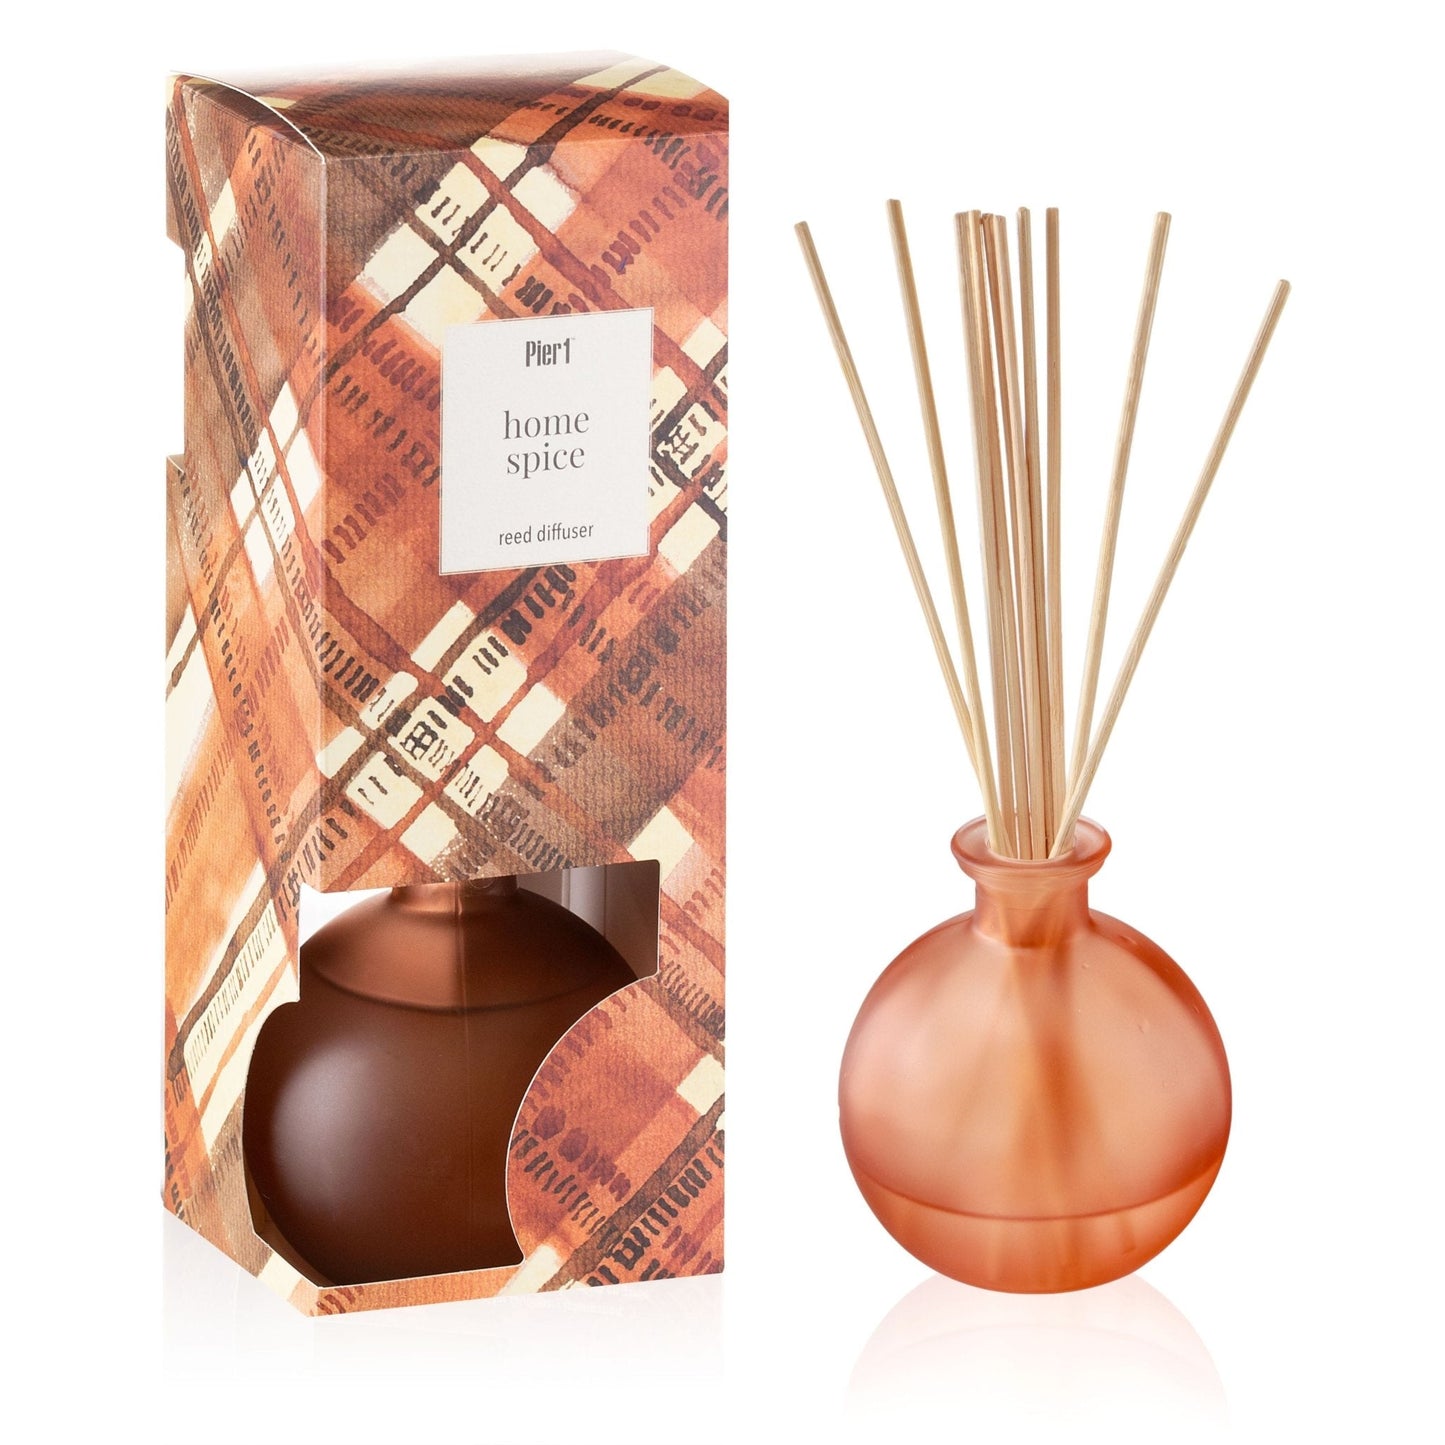 Pier 1 Home Spice 8oz Reed Diffuser - Pier 1